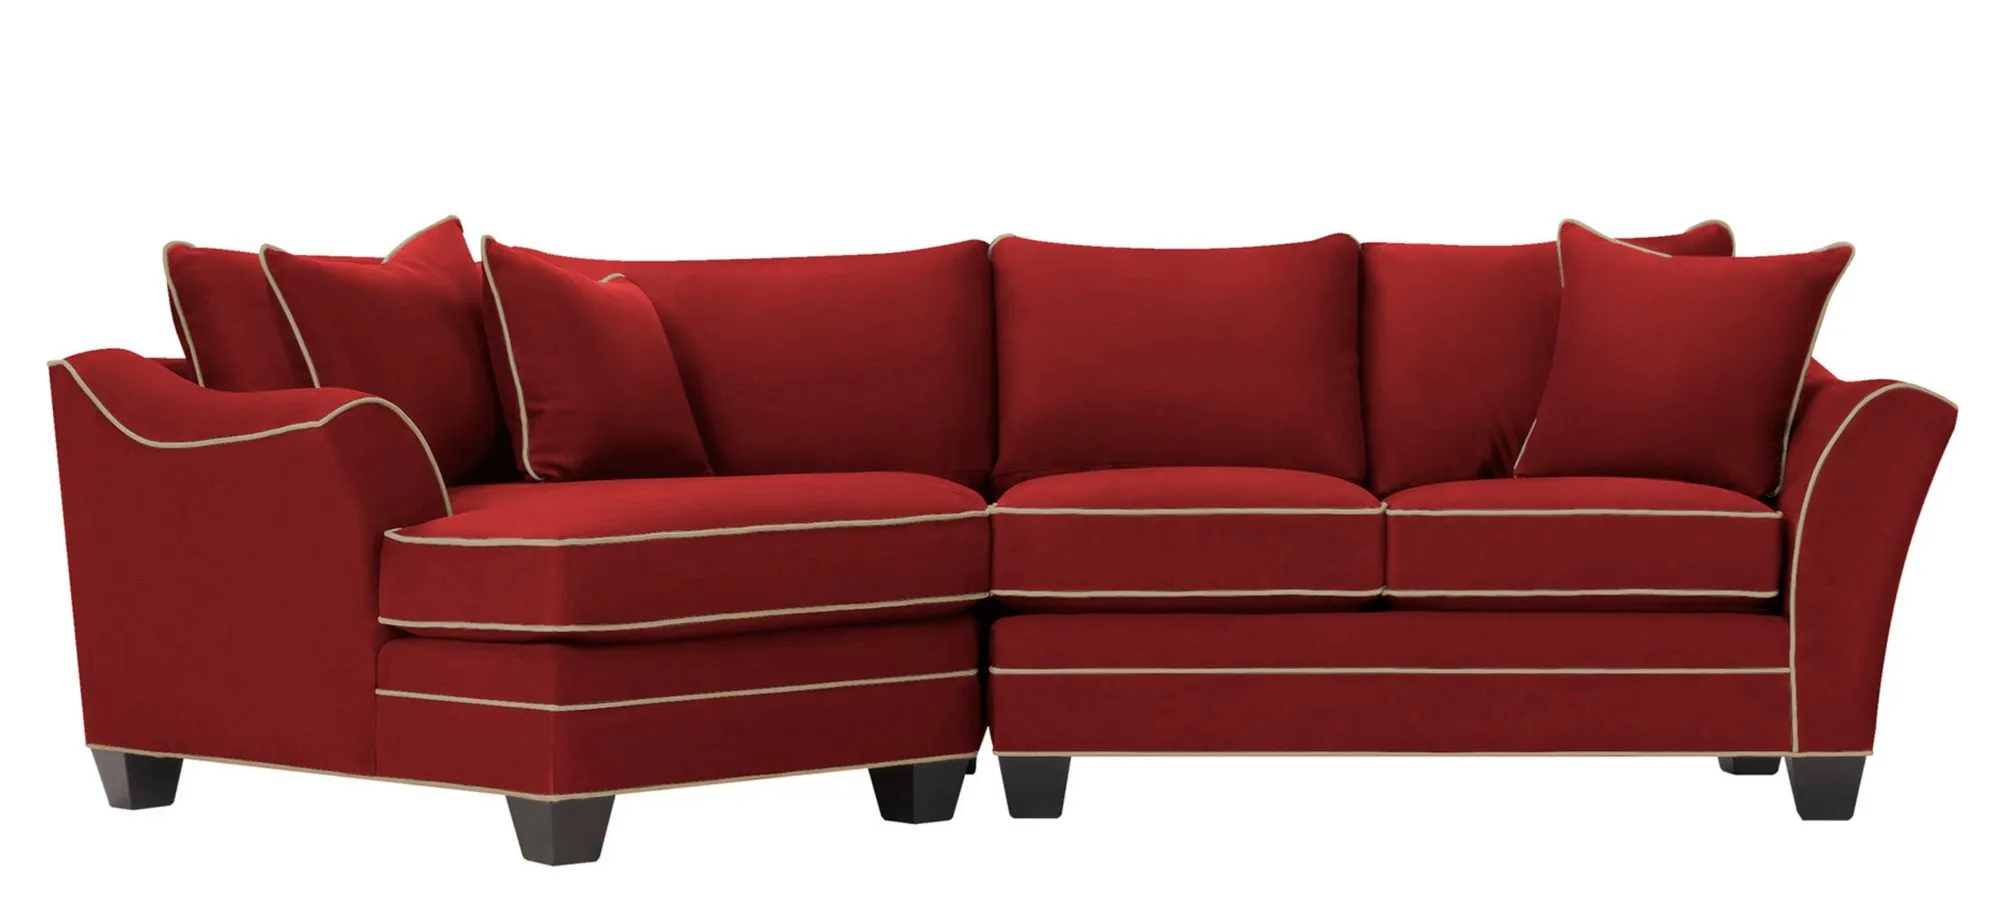 Foresthill 2-pc. Left Hand Cuddler Sectional Sofa in Suede So Soft Cardinal/Mineral by H.M. Richards